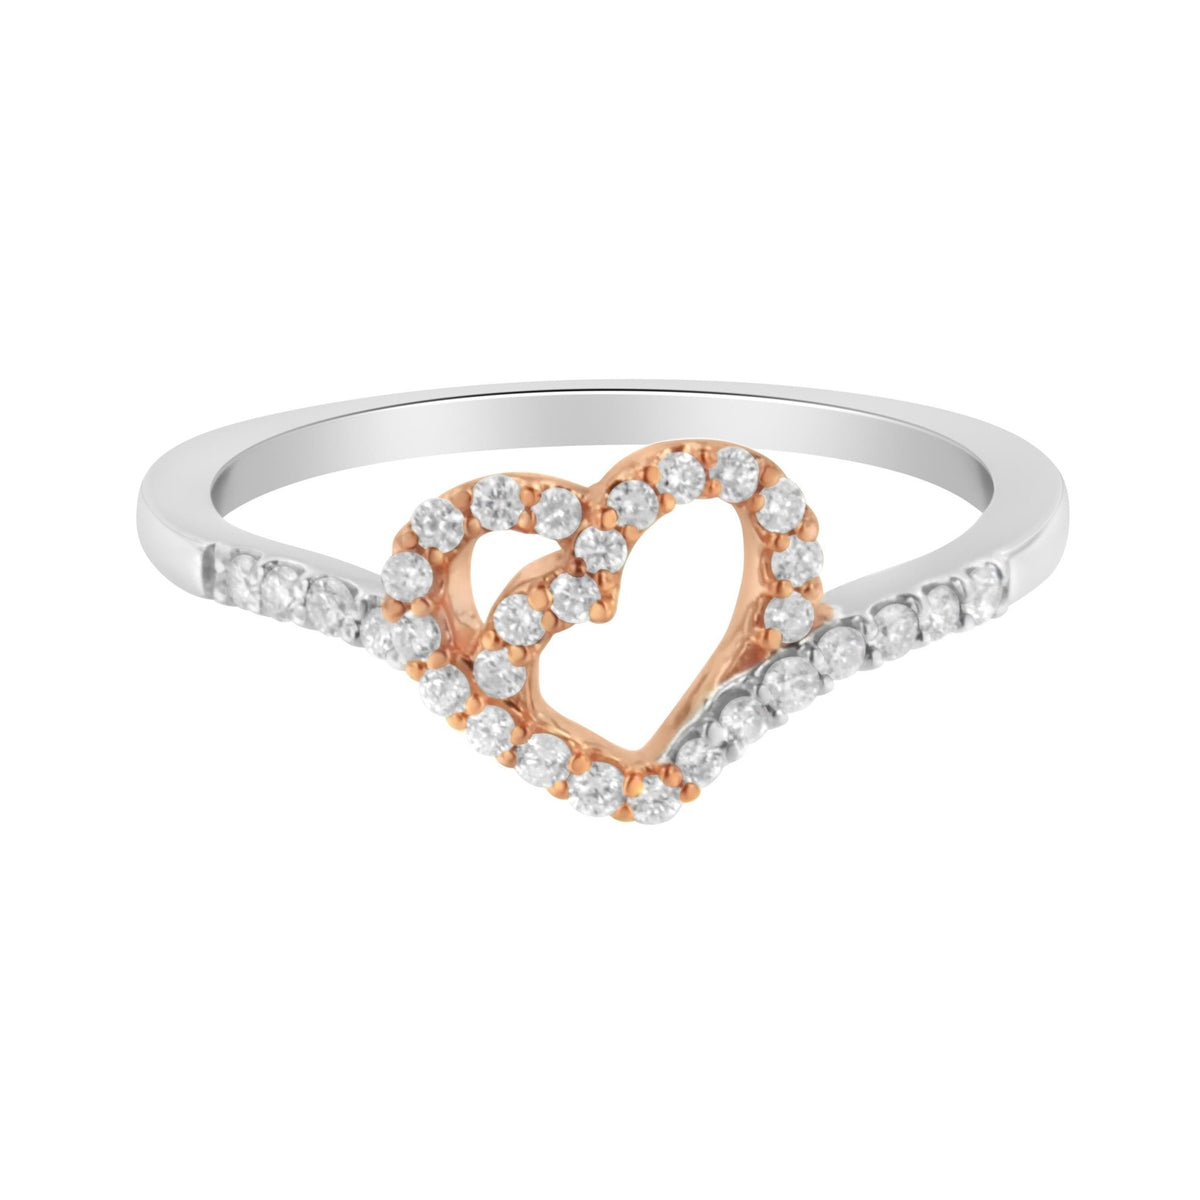 10K Rose Gold over .925 Sterling Silver 1/5 Cttw Diamond Two Tone Open Heart Promise or Fashion Ring (I-J Color, I2-I3 Clarity) - Size 6 - LinkagejewelrydesignLinkagejewelrydesign